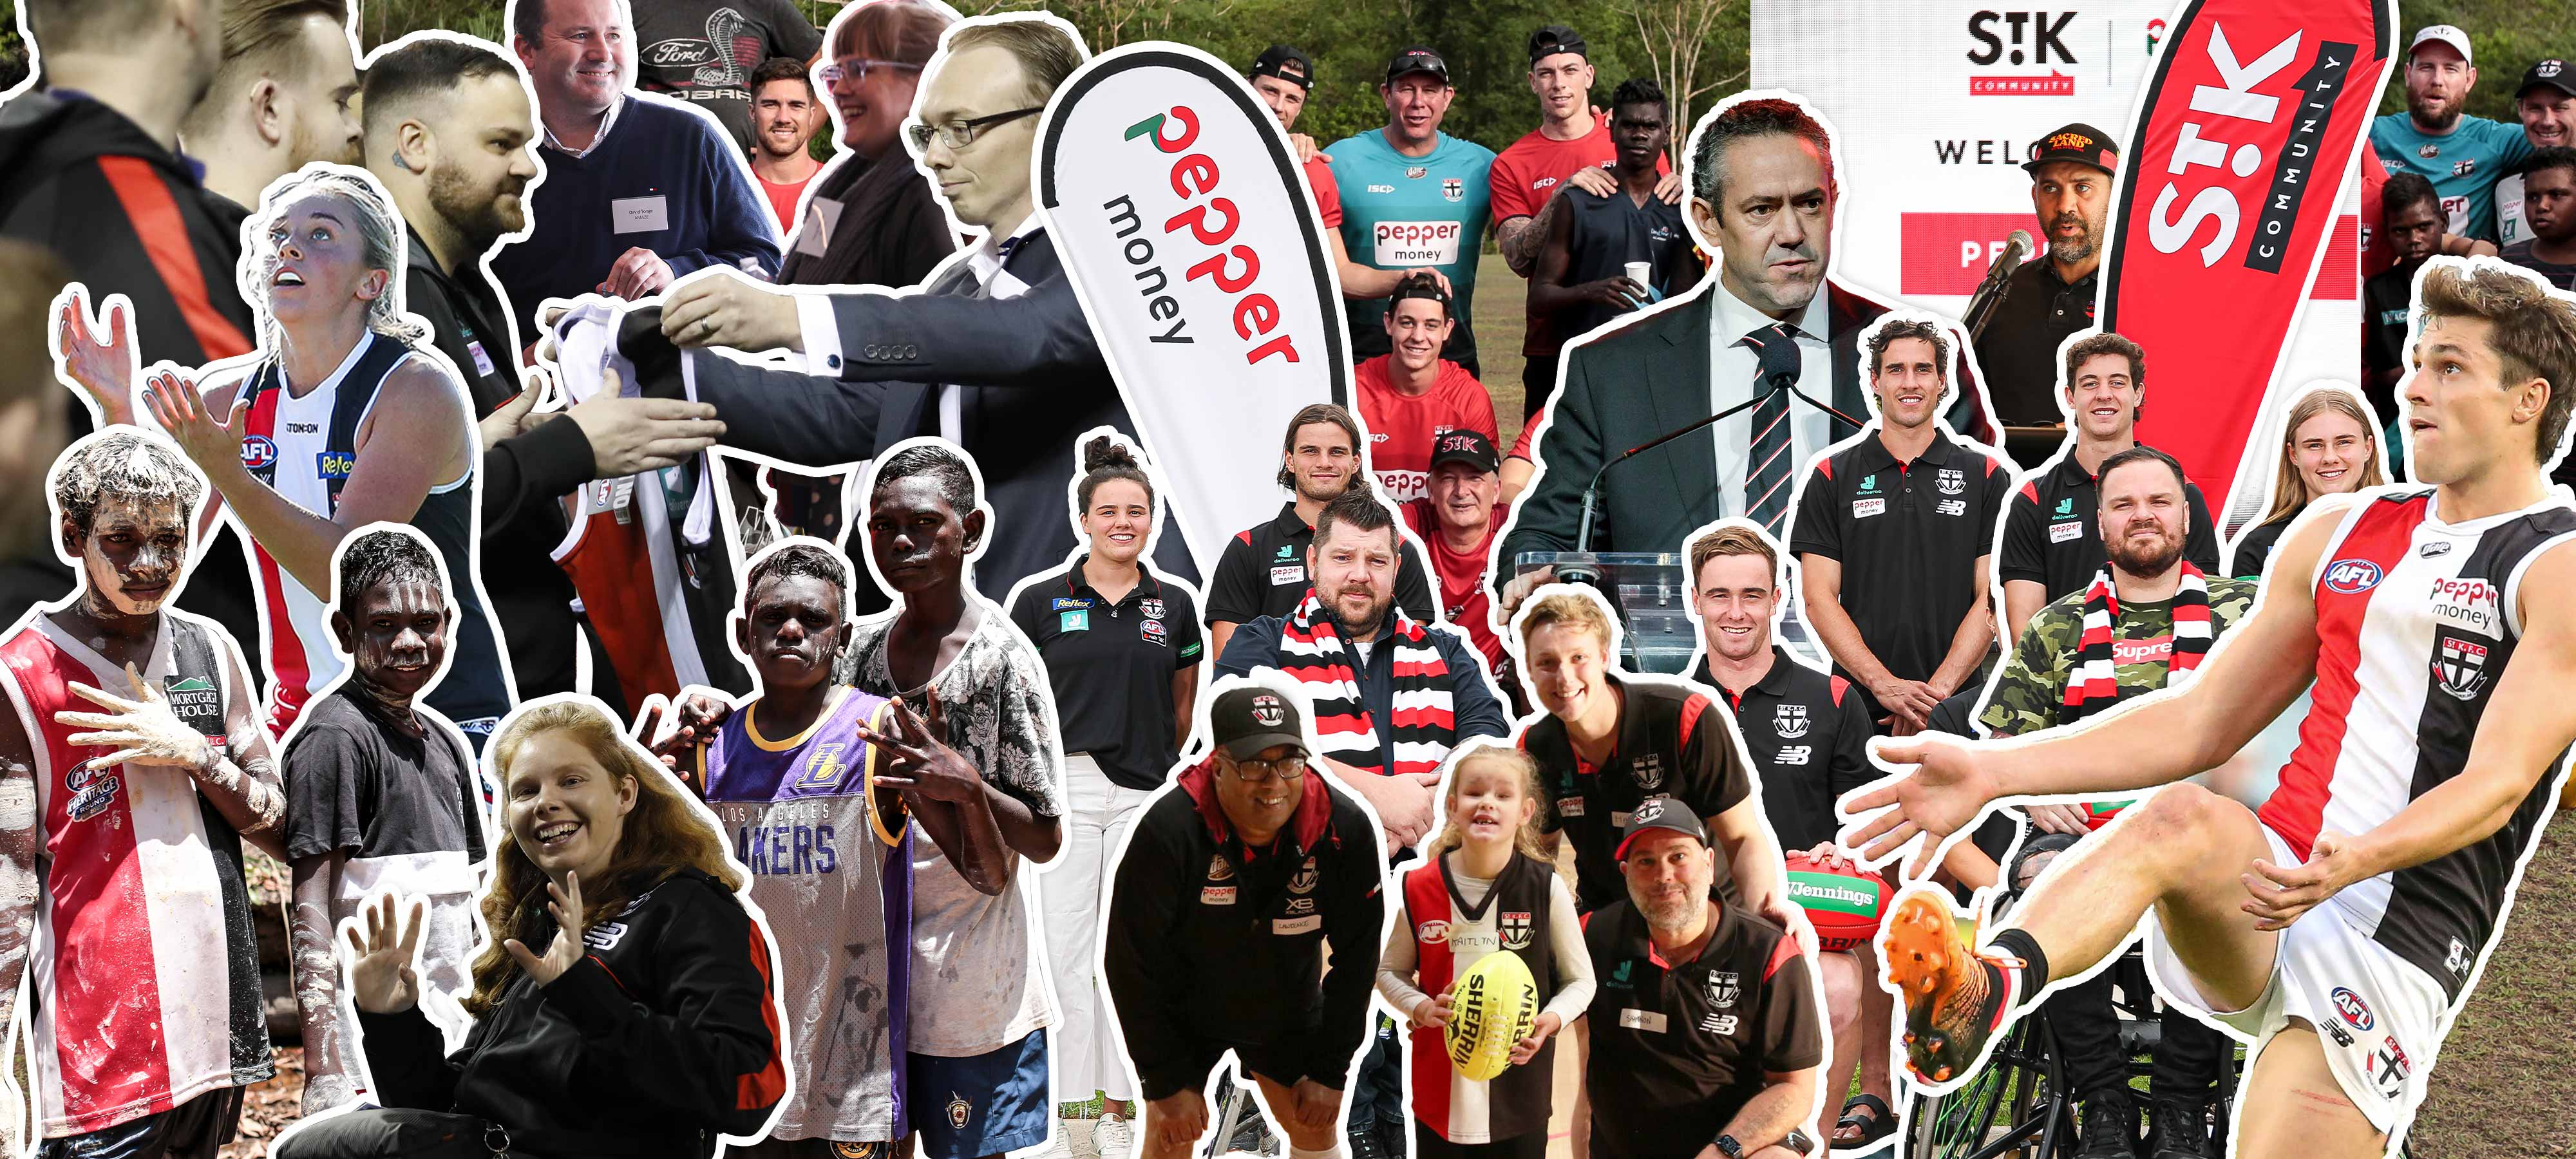 Pepper Money shows support for St Kilda Football Club